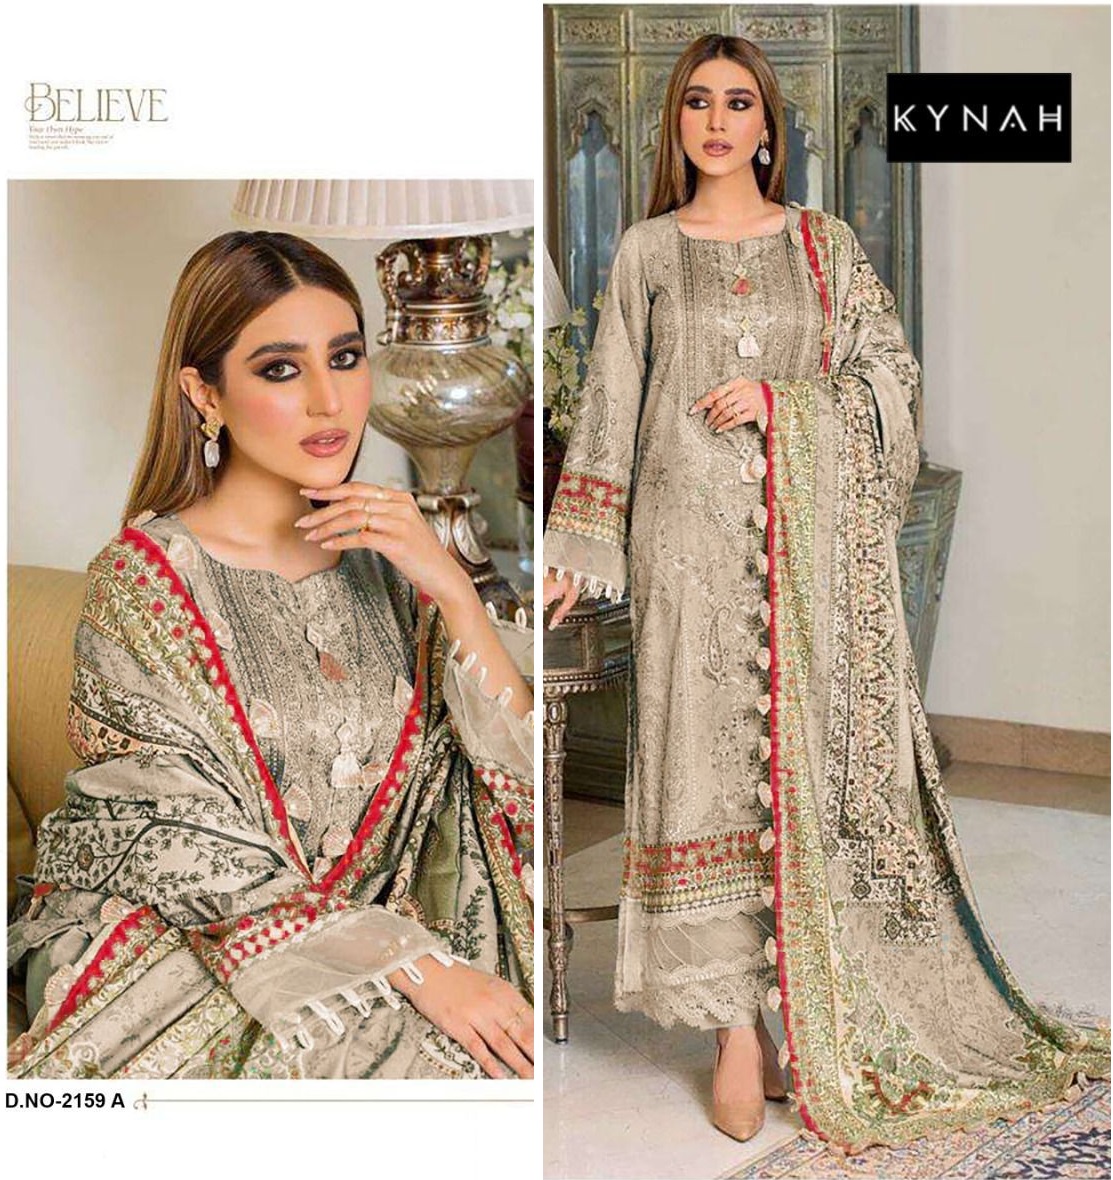 KYNAH 2159 A COTTON PAKISTANI SUITS IN INDIA